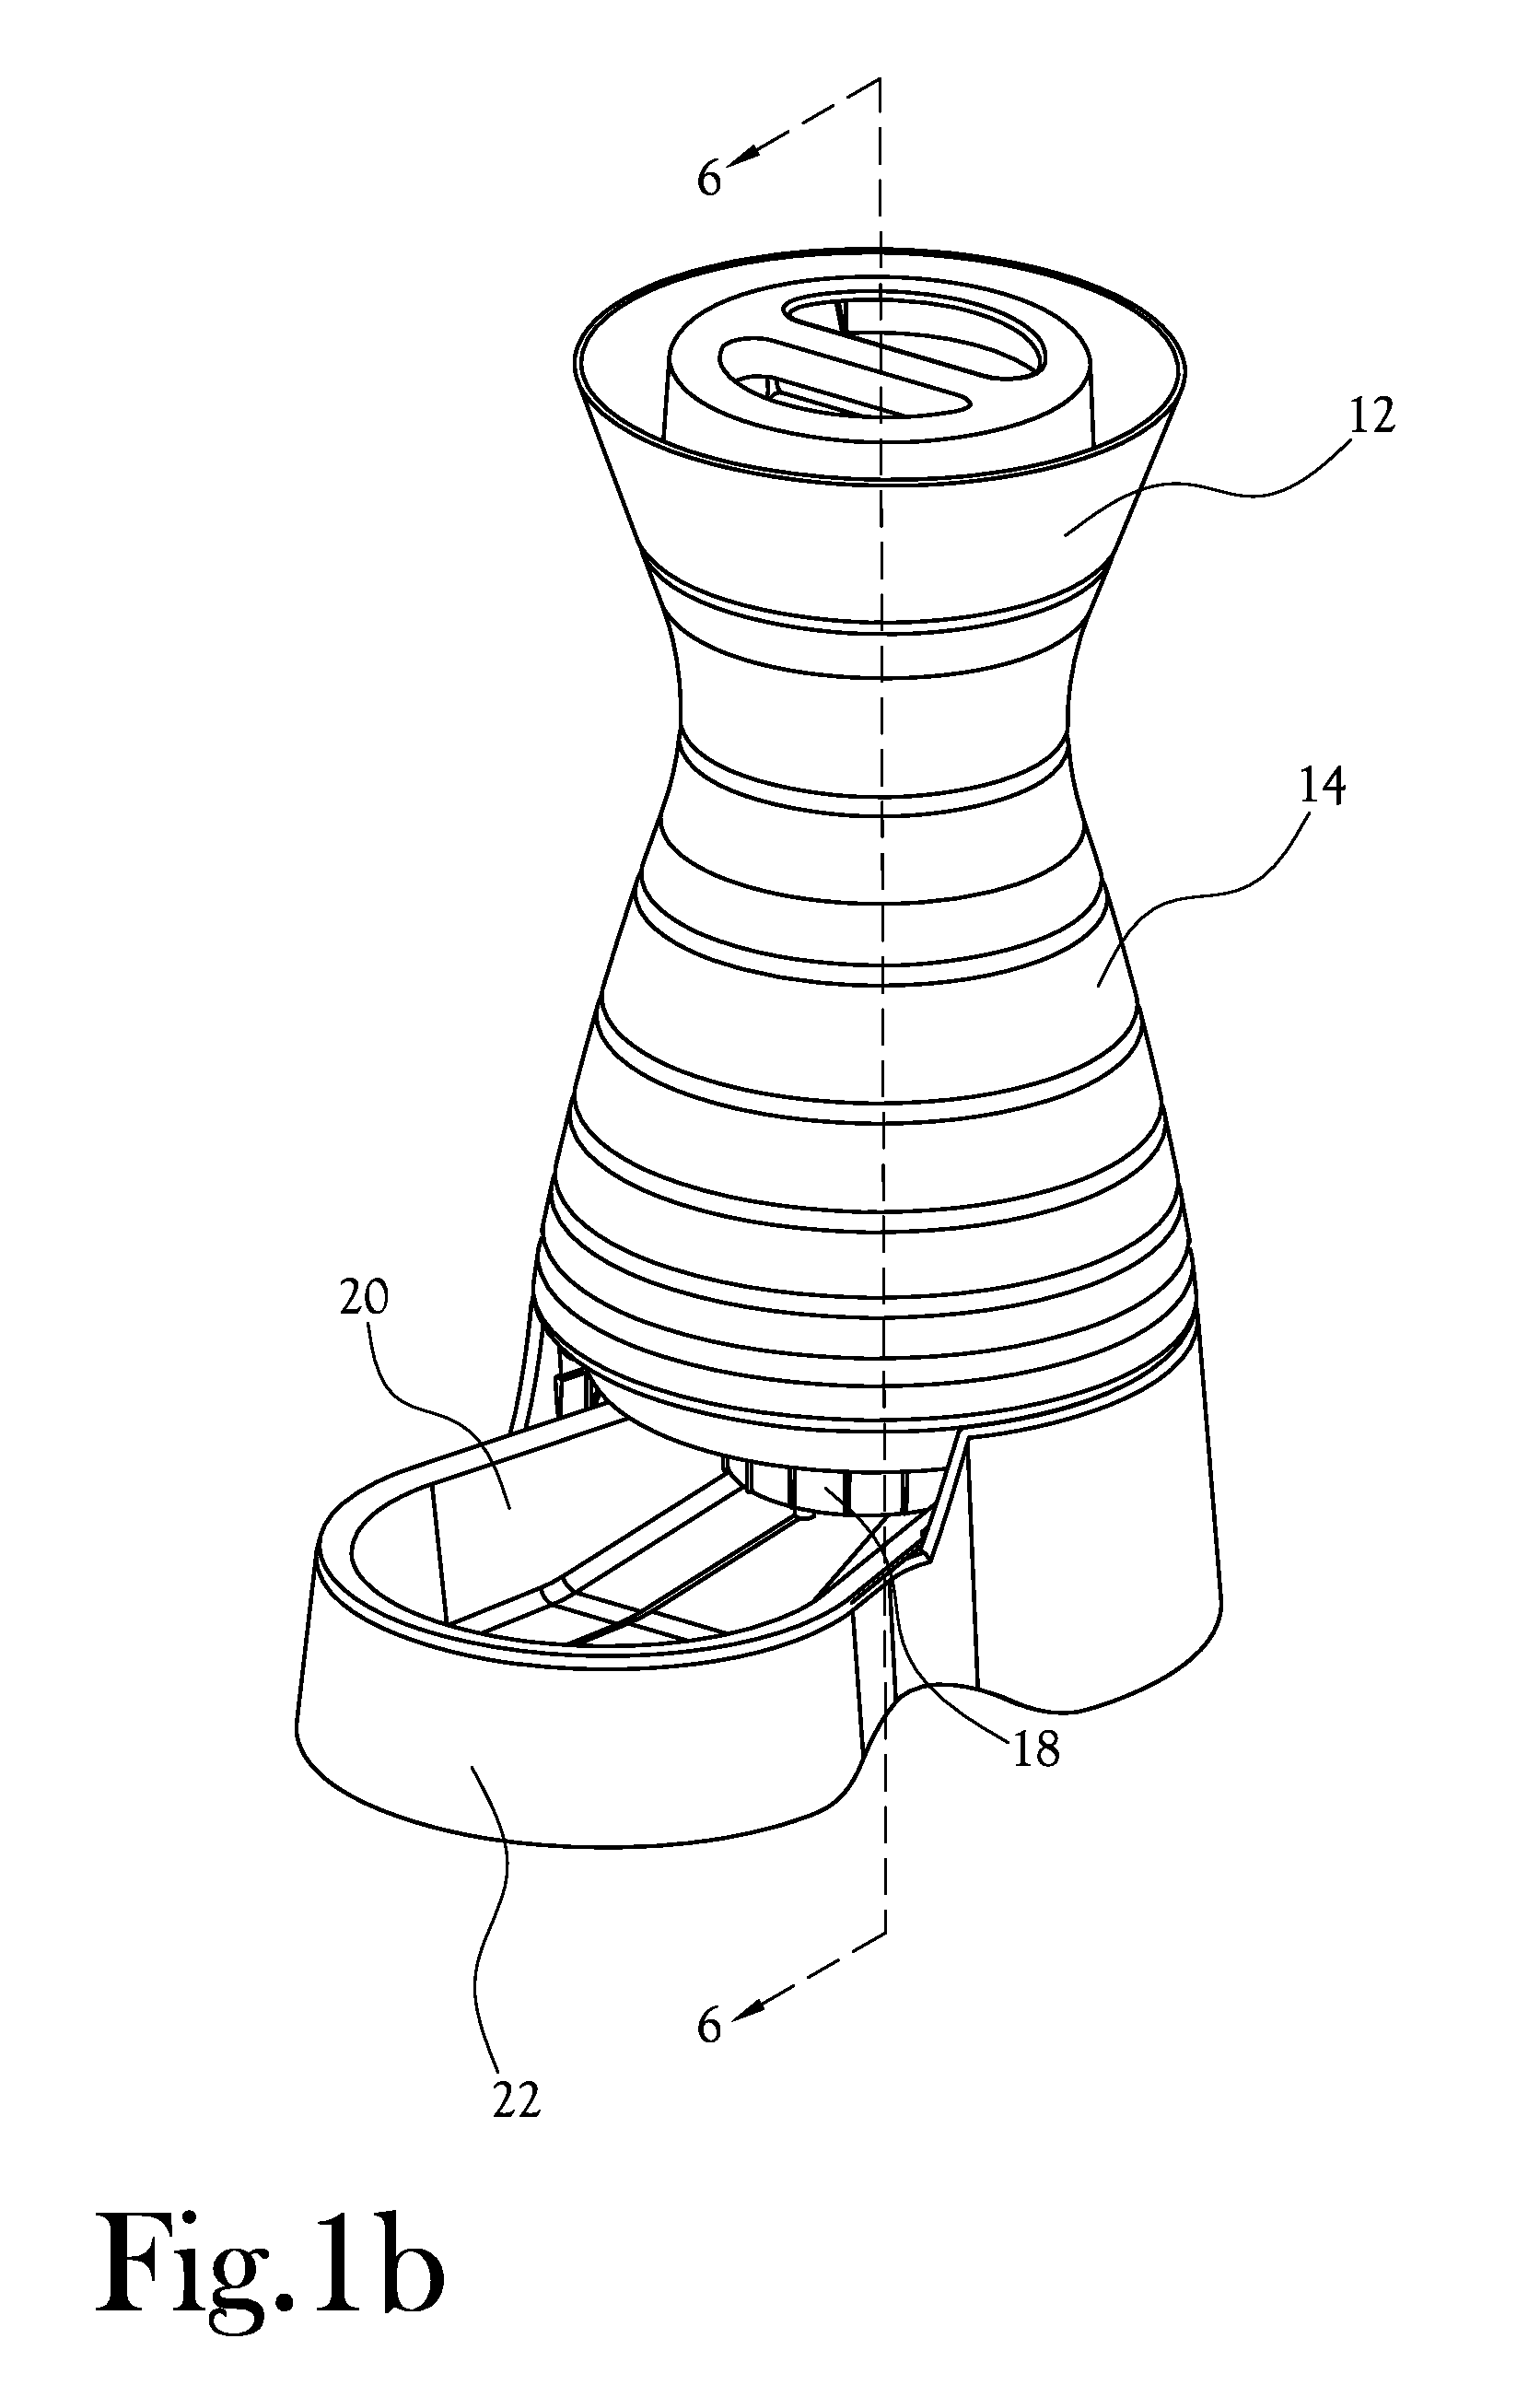 Gravity-Induced Automatic Animal Watering/Feeding Device